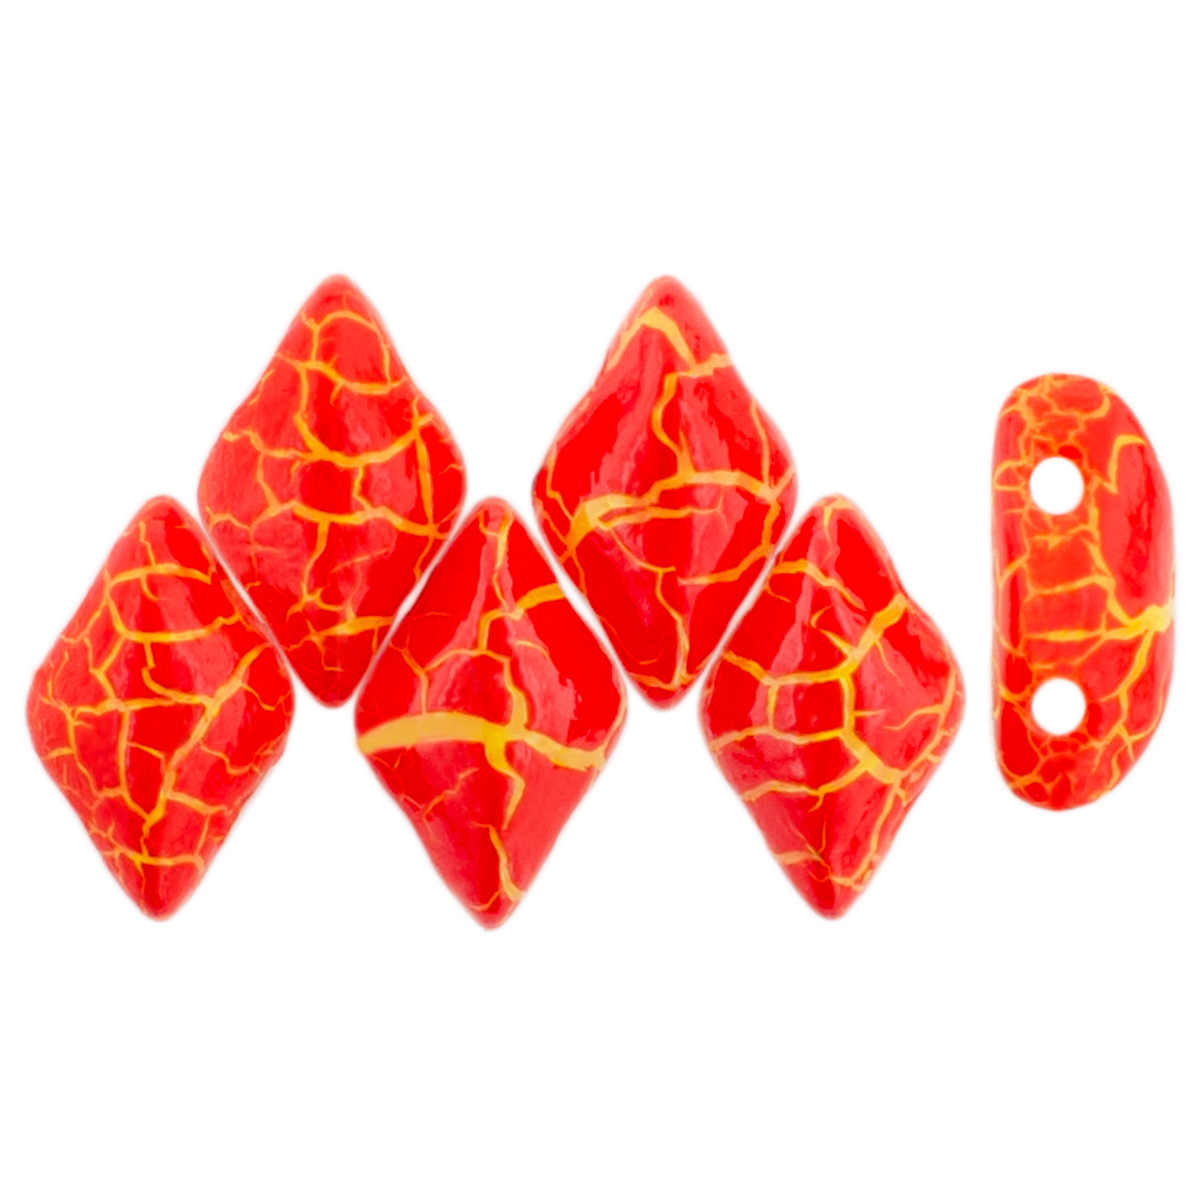 GEMDUO 8 x 5mm (loose) : Colortrends: Ionic Red/Yellow